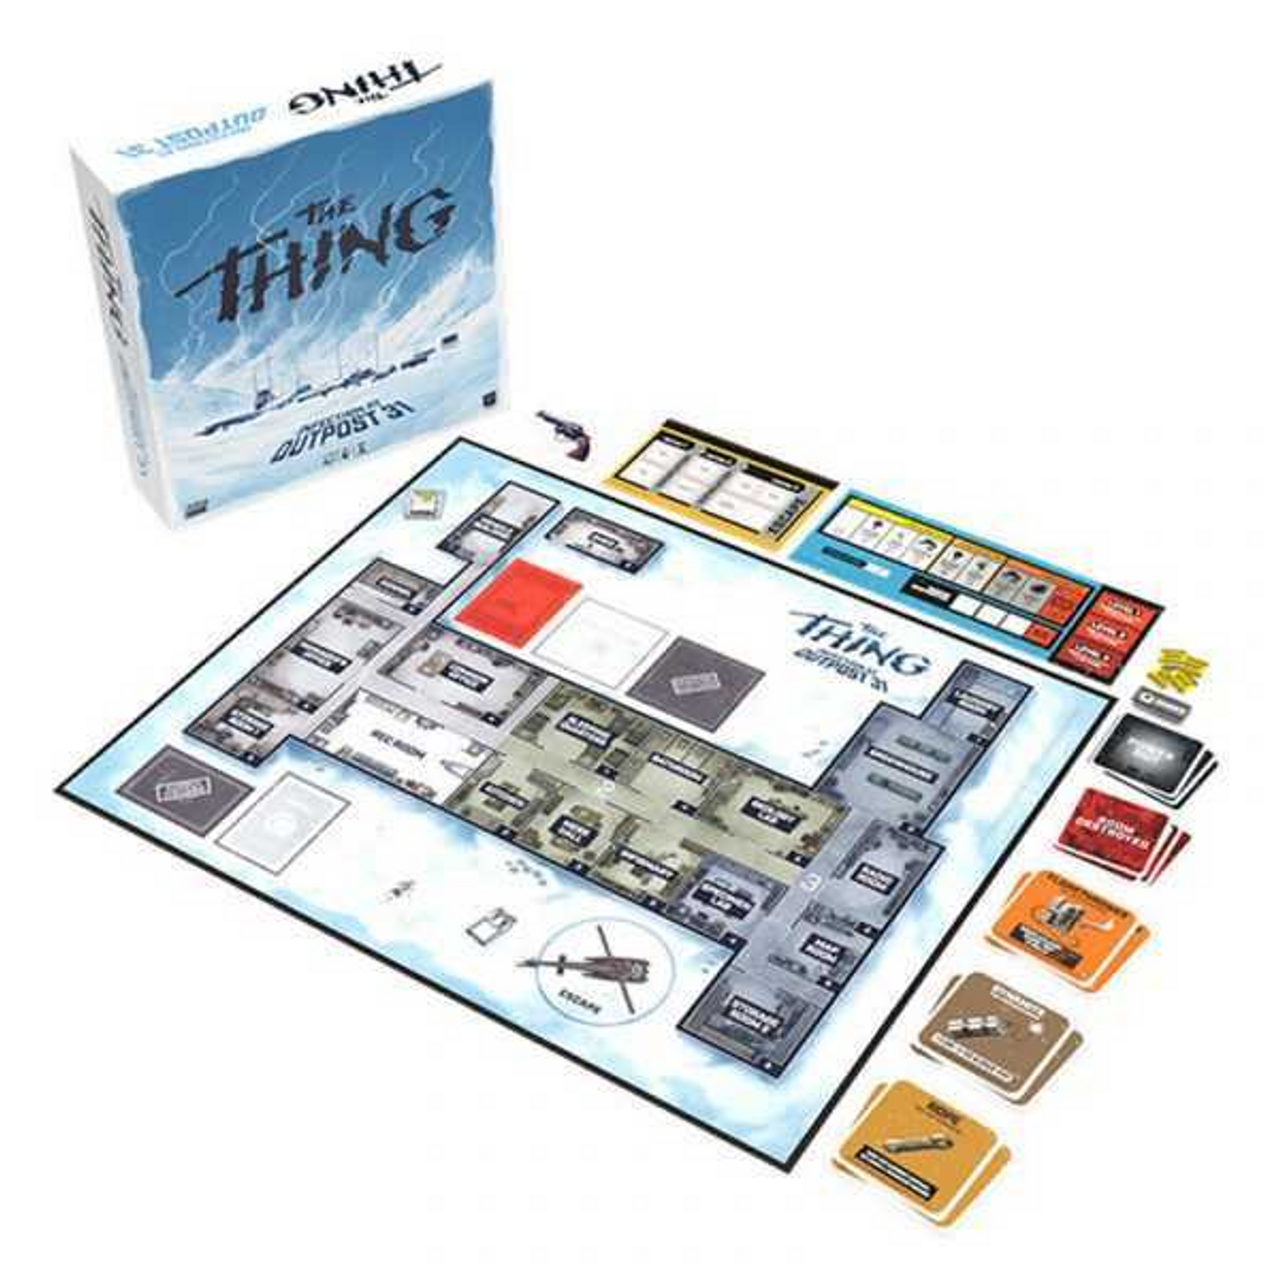 The Thing Infection At Outpost 31 Game